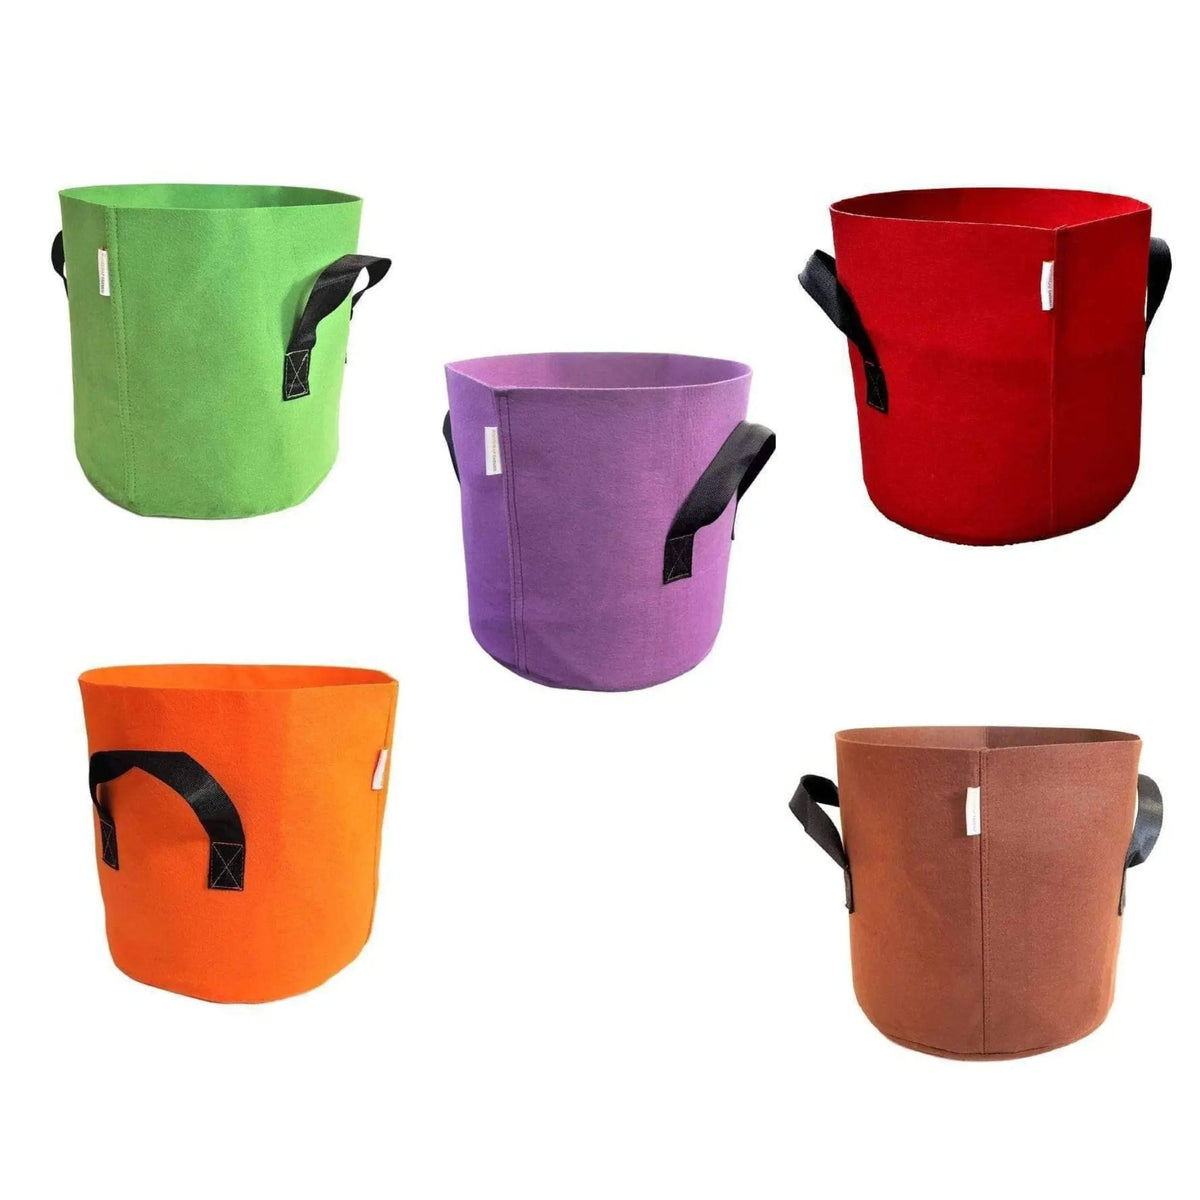 https://cdn.shopify.com/s/files/1/1338/7937/products/Grow_Bags_7_Gallon_Variety_d8de353f-a97e-4c44-b974-6452661a3a71_2000x_1_1200x.jpg?v=1668473017